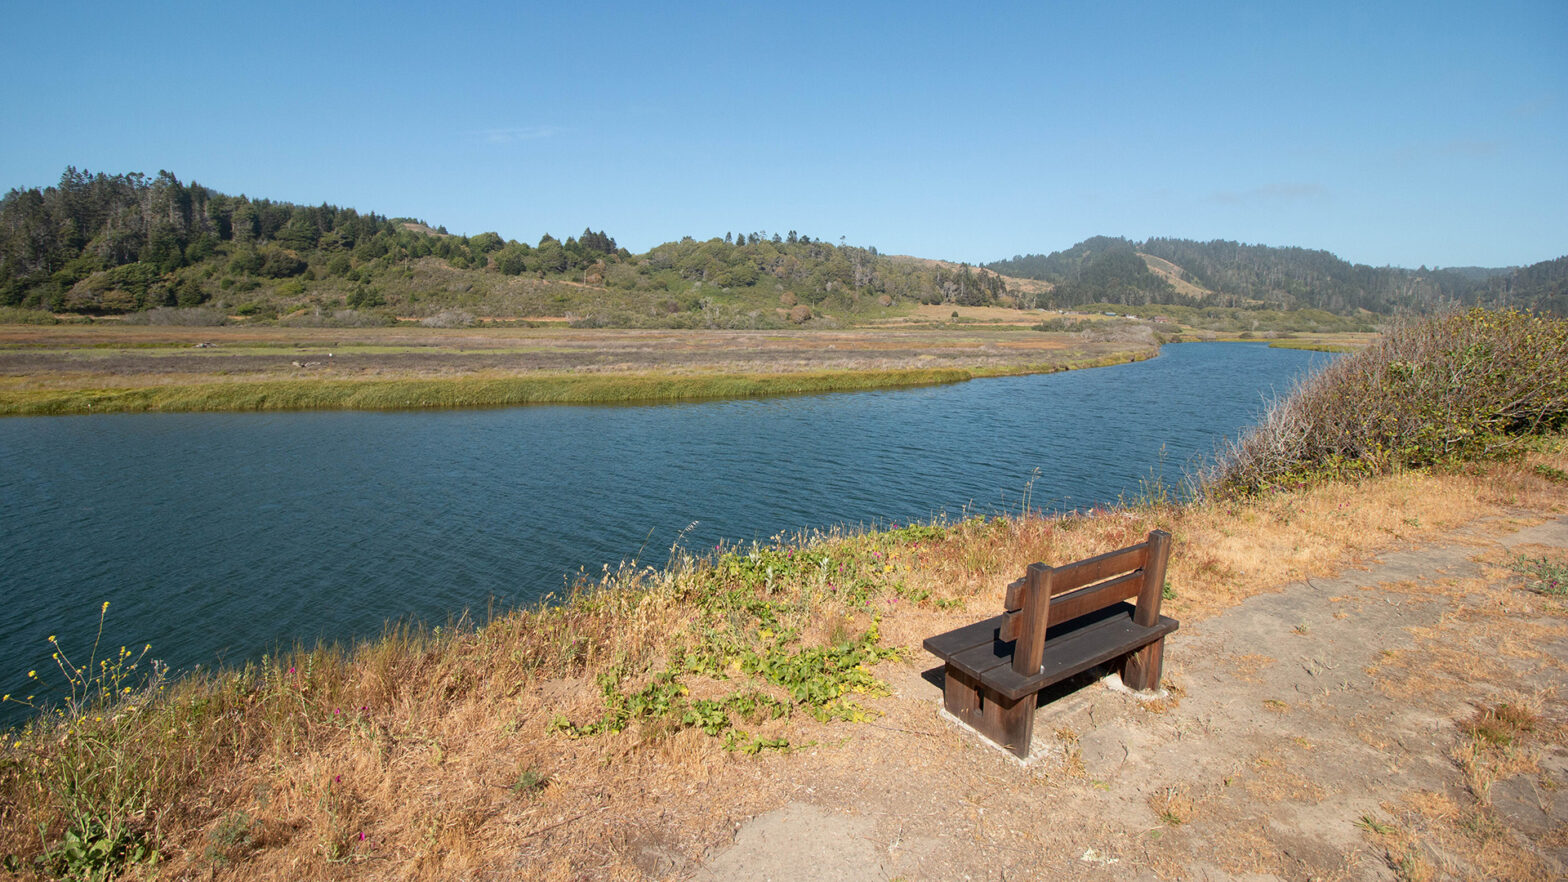 A bench along the ten mile river at old smith ranch